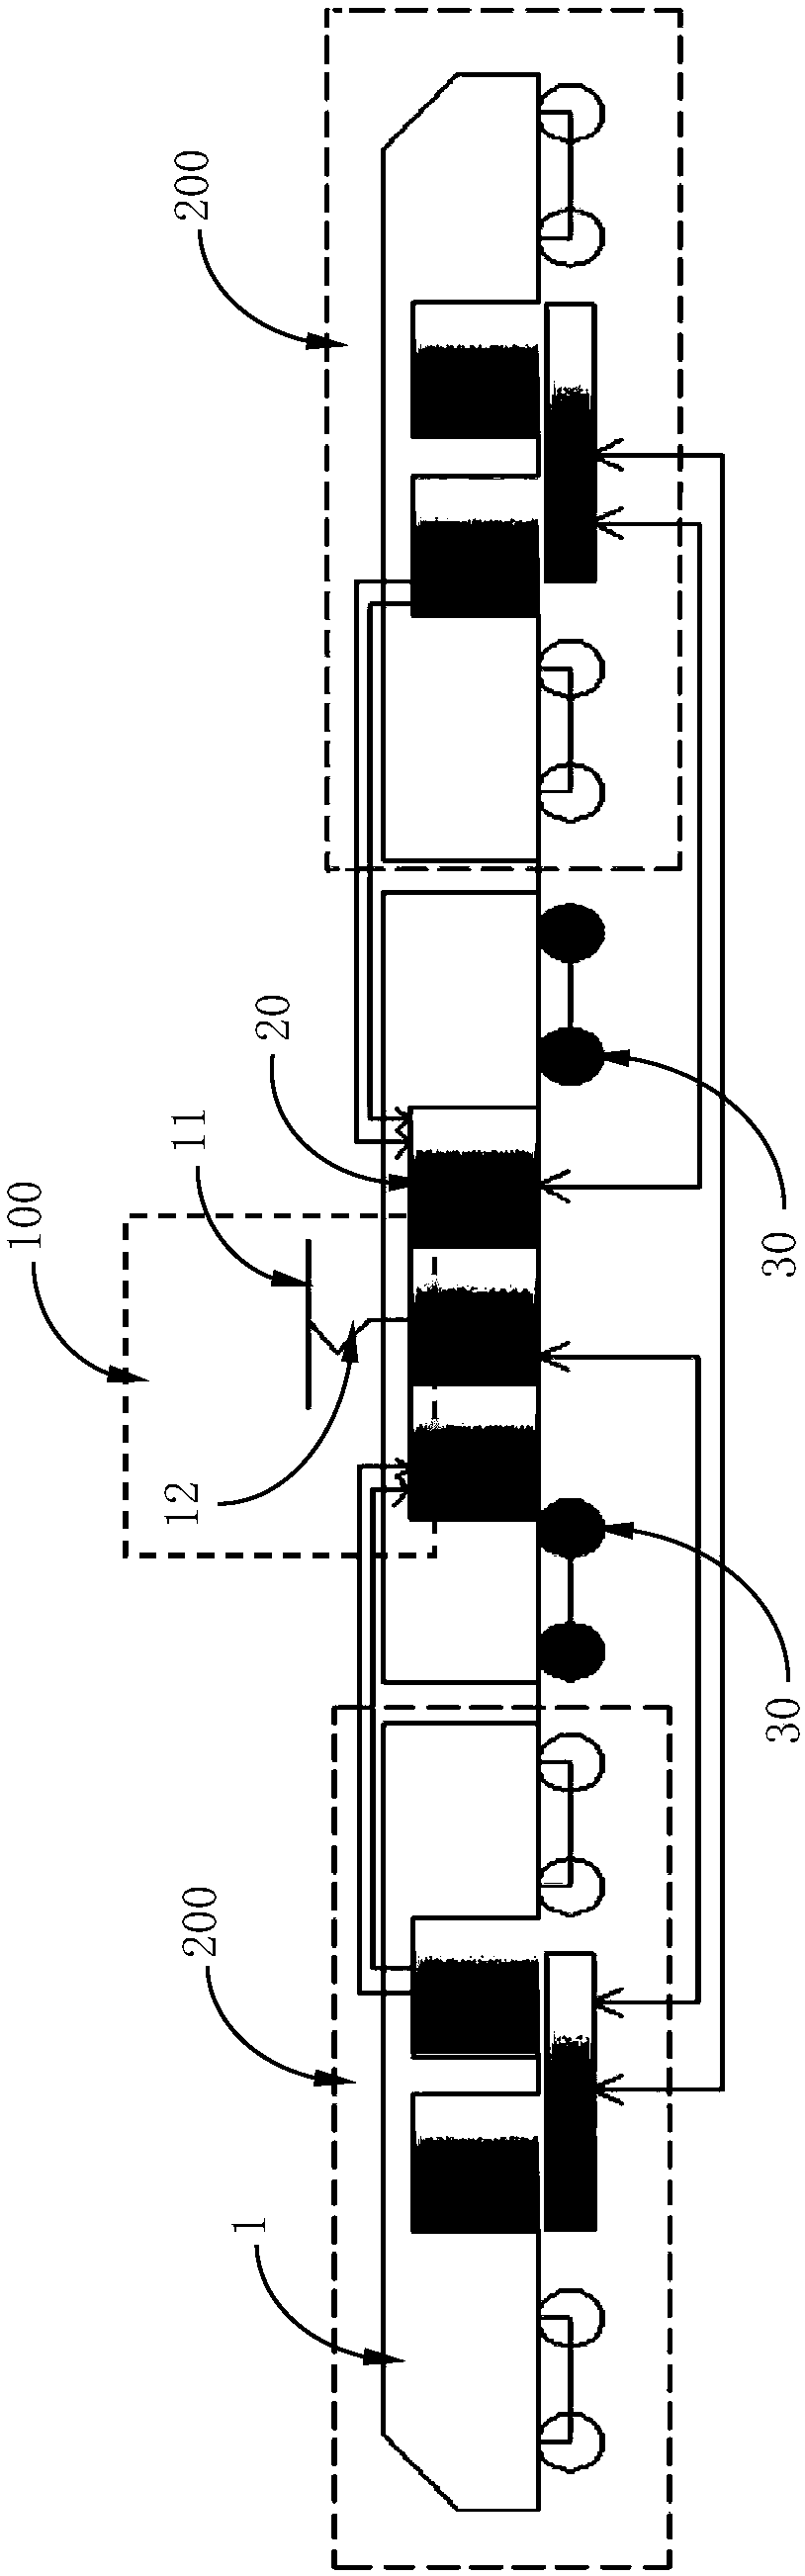 Control method for hybrid power source for railway engineering machinery